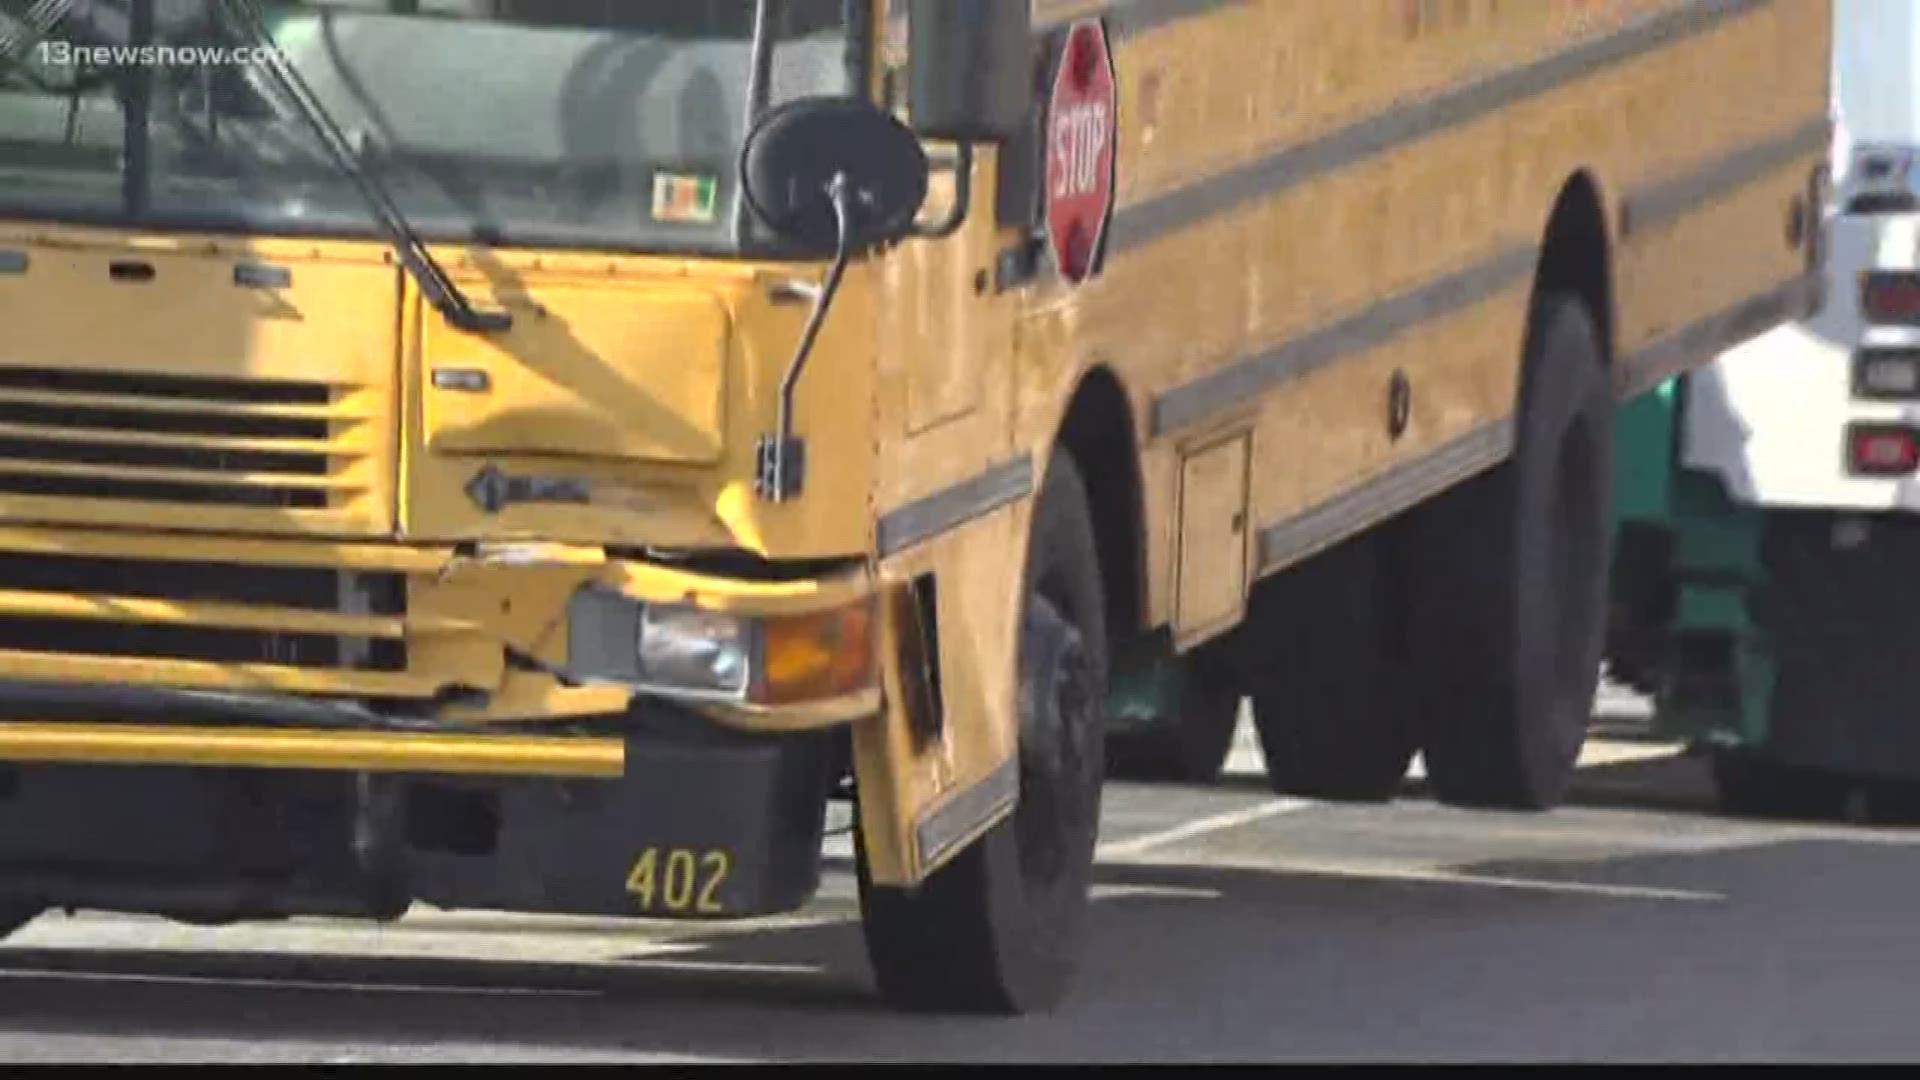 Two students slightly injured after Newport News bus collides with SUV Friday morning.